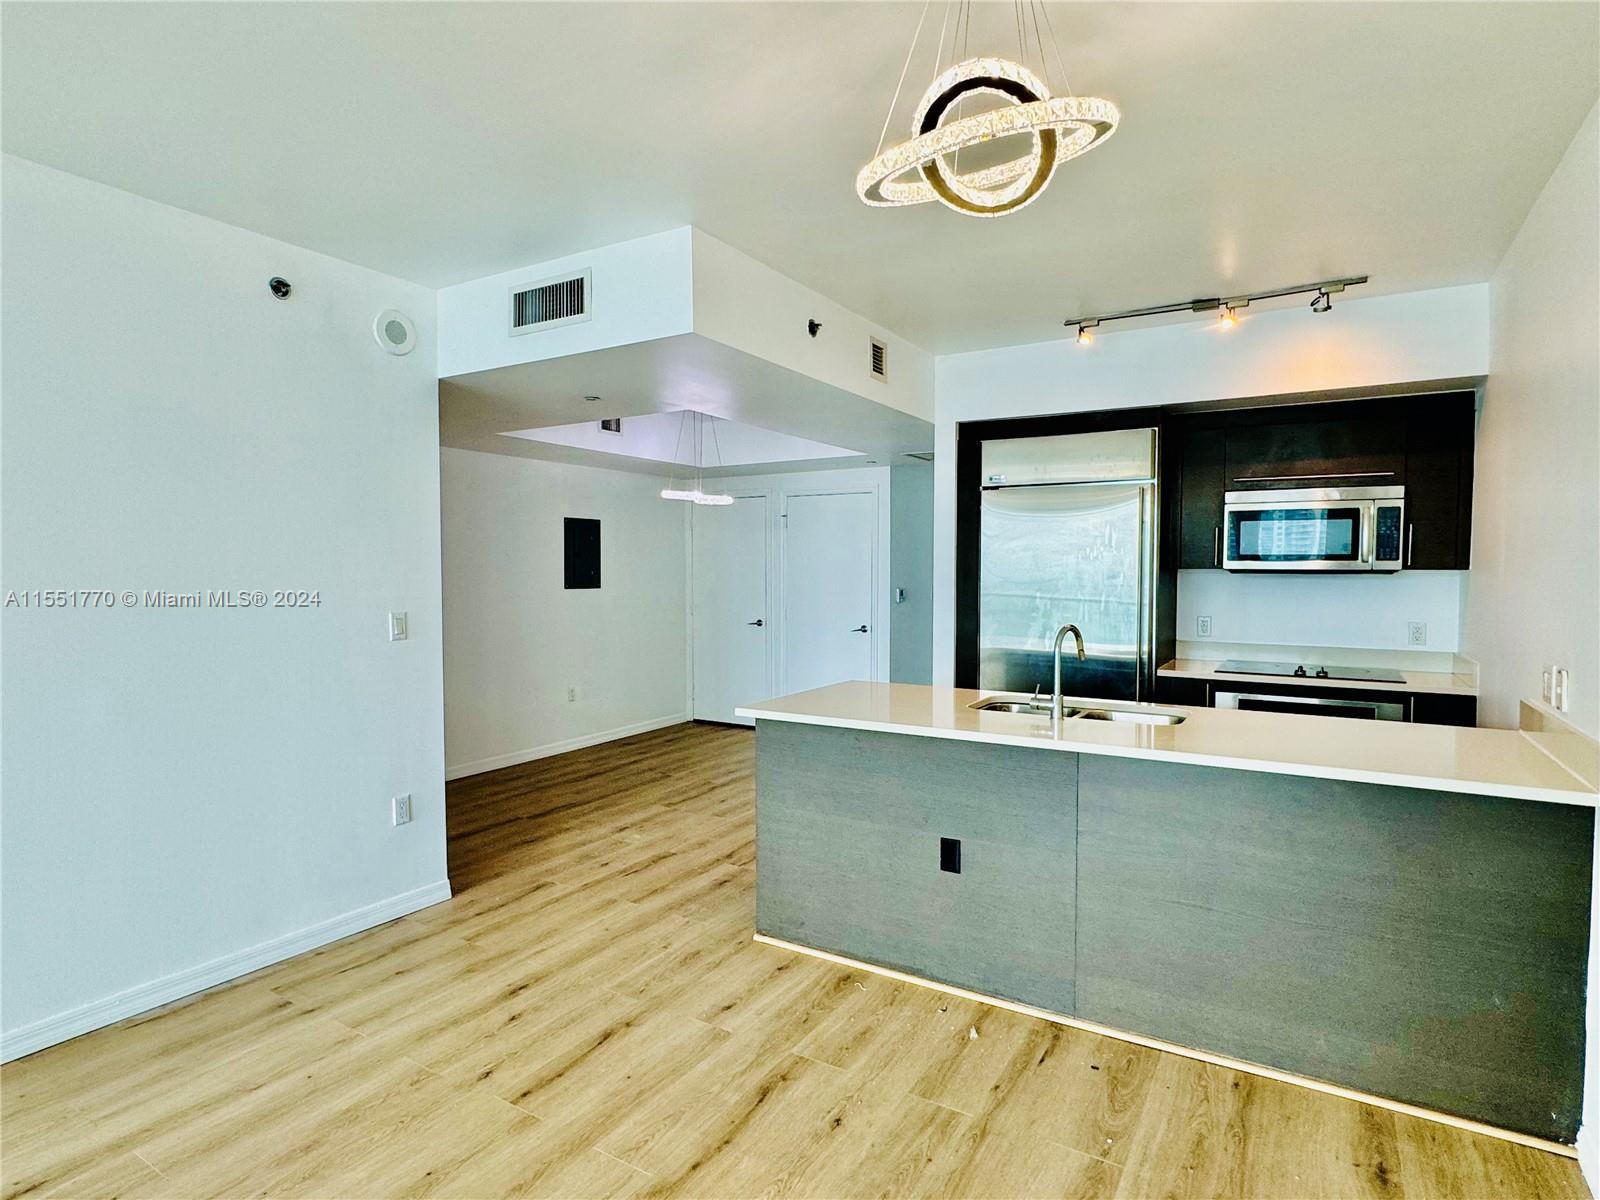 Gorgeous 1-bedroom + 1-bathroom conveniently located in the heart of Brickell. The building offers outstanding amenities, heated rooftop pool & sundeck, 11th-floor pool & sundeck with poolside cabanas, fitness center, sauna & steam rooms, sports room w/billiards table & kitchen, wine cellar, club room, & theater room. Few Blocks Away from Brickell City Center, Kaseya Center, Downtown. One of the best places in South Florida to live, work, and play! * The owner is working on replacing the carpet with flooring.